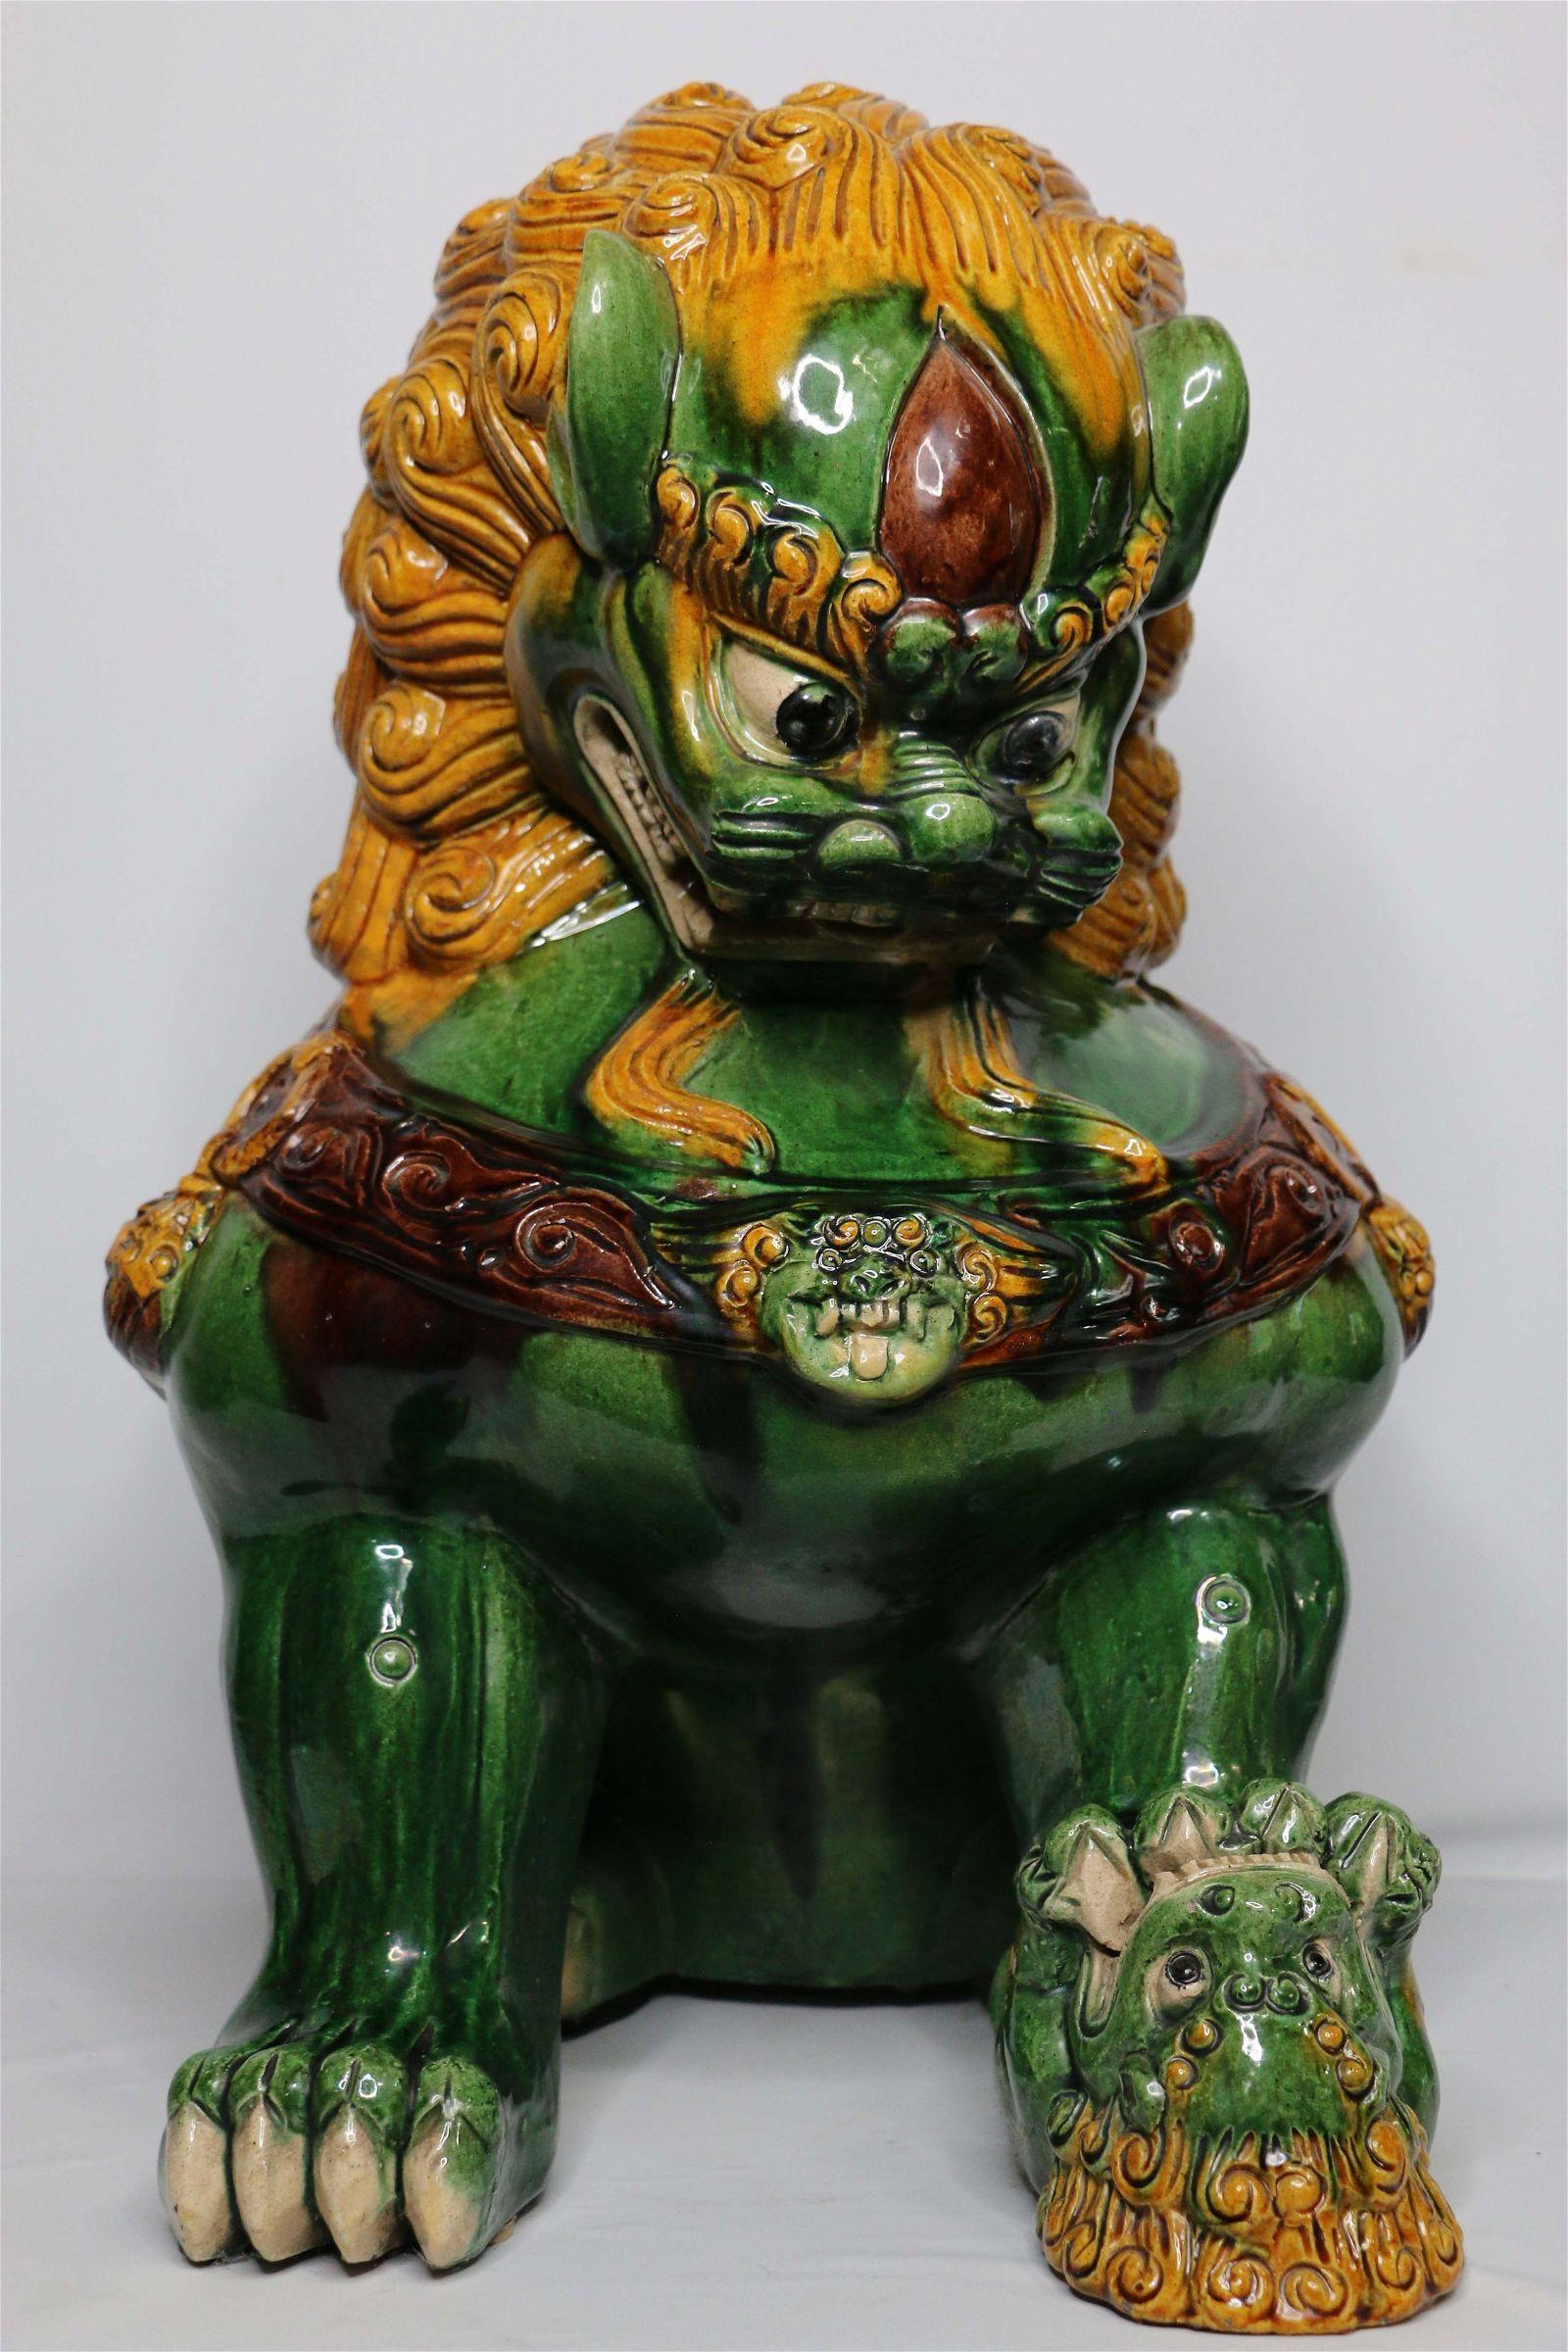 Large Chinese Foo lion. Predominantly green glaze with golden yellow detail attributed to Tang Dynasty glaze coloring. This unusually large foo dog displays fierce countenances. It hold the traditional 'ball'. Typically seen as part of a pair